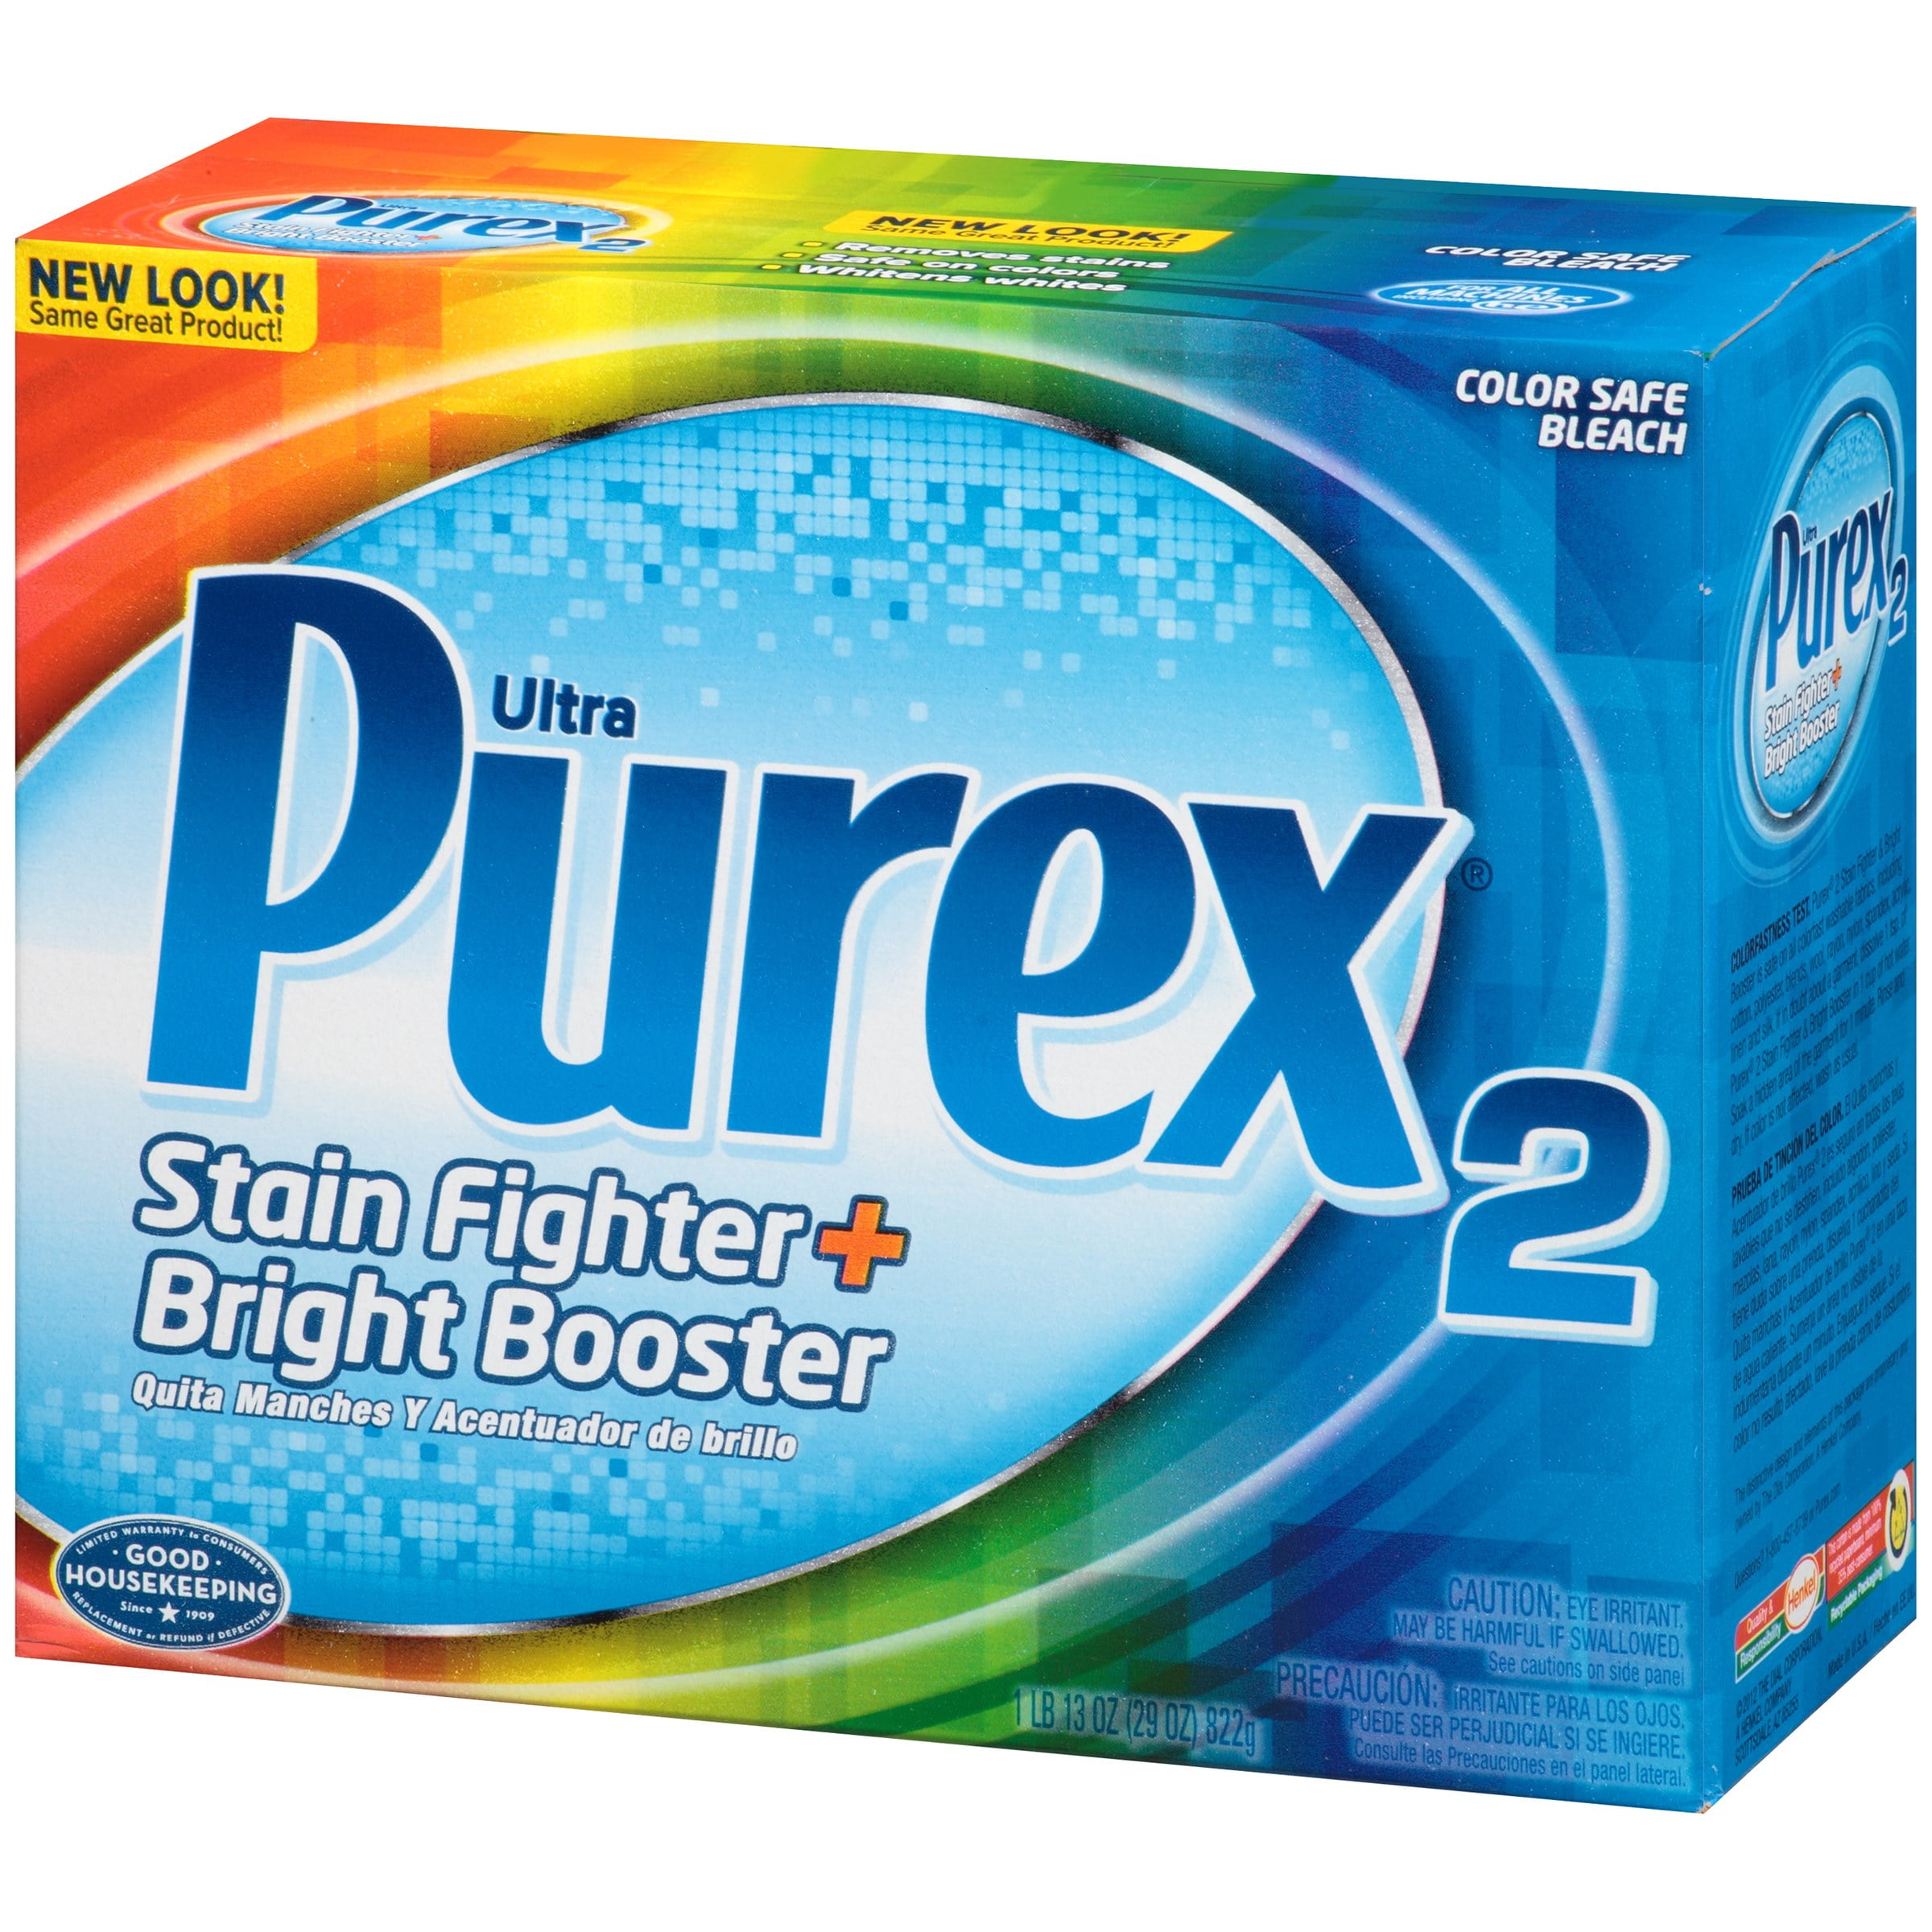 Purex2 Liquid Laundry Color Safe Bleach, Stain Fighter And Bright